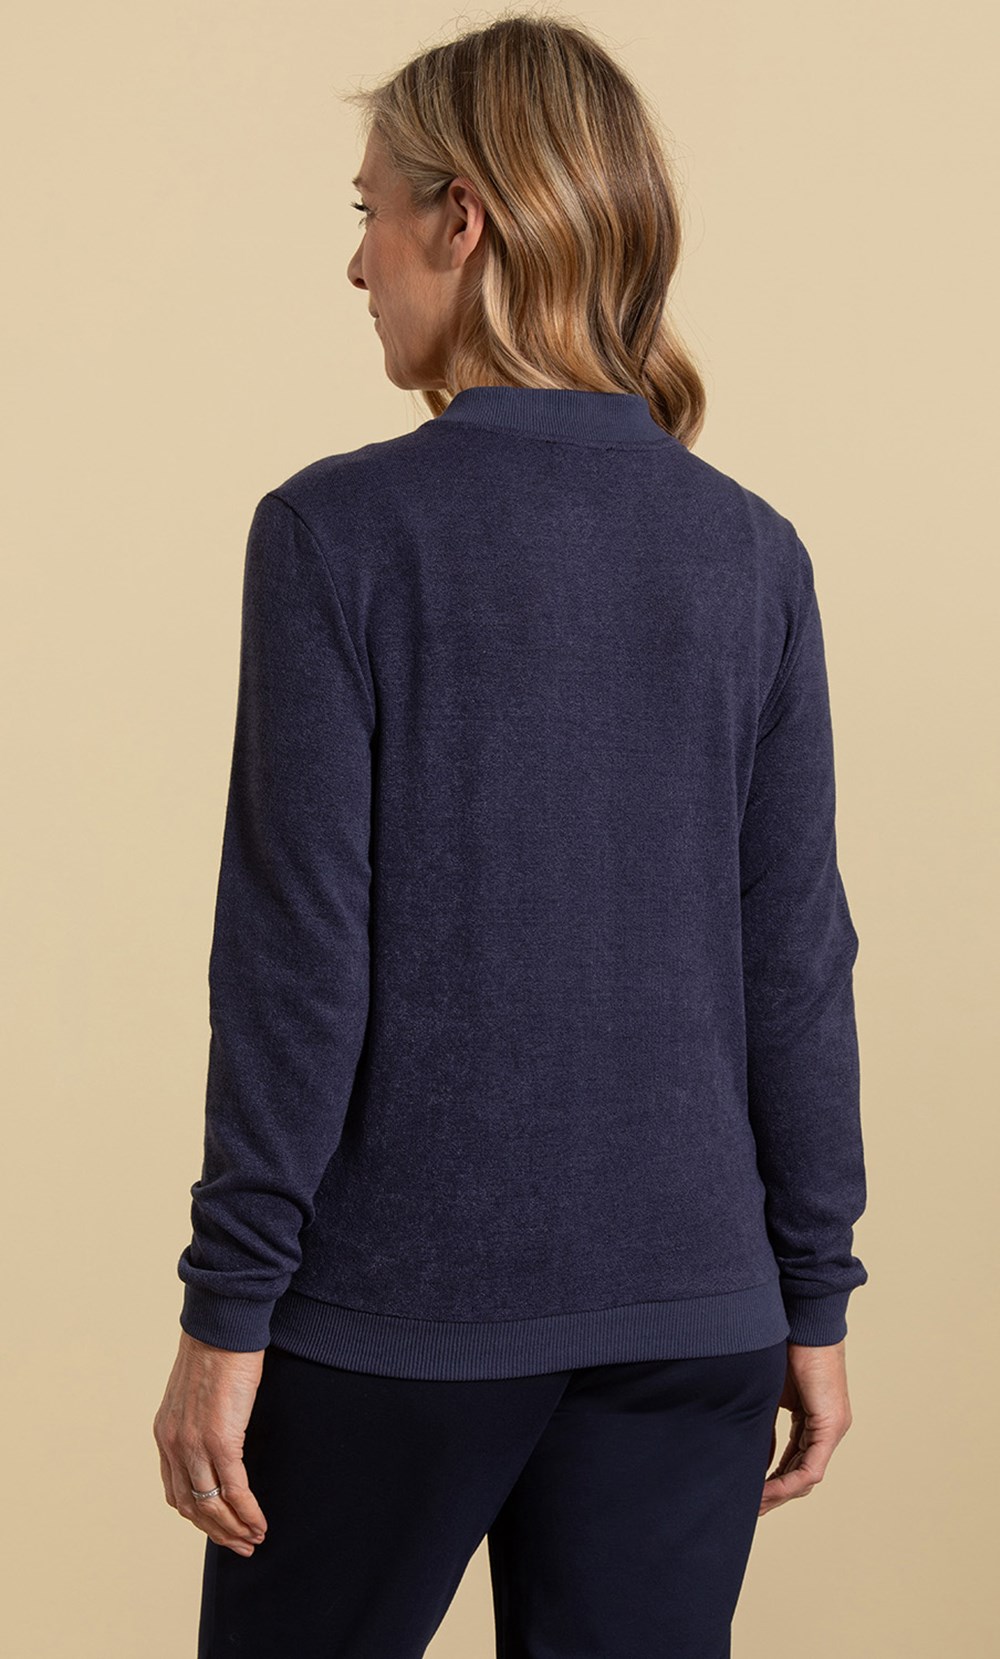 Anna Rose Broderie Anglaise And Knit Jacket in Blue | Klass